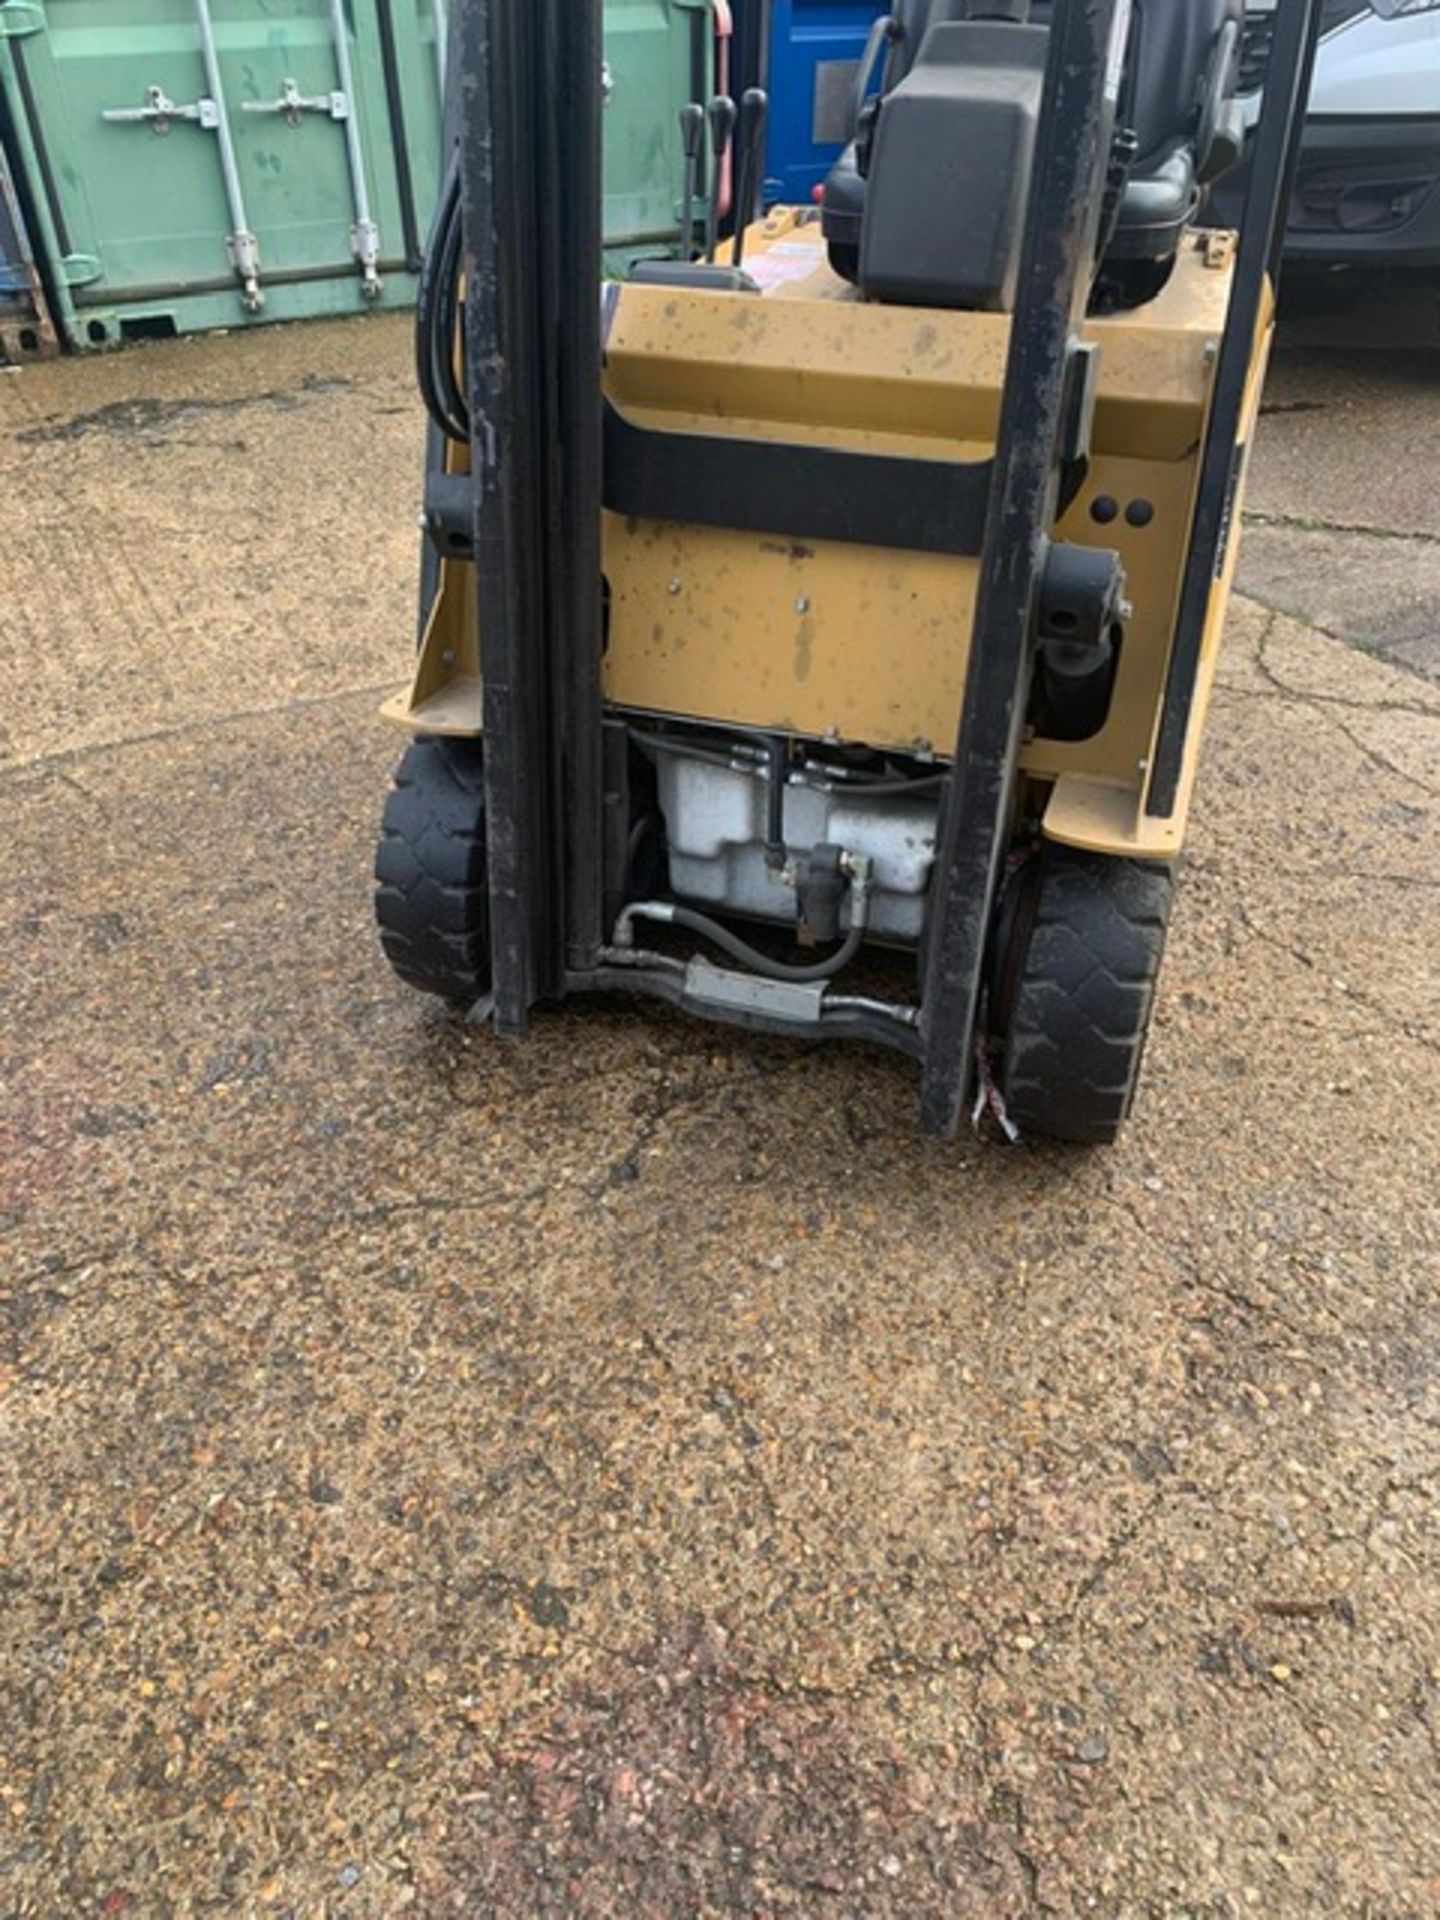 CATERPILLAR EP12KRT-PAC BATTERY FORKLIFT TRUCK, YEAR 2016 BUILD. 1.2 TONNE RATED. WHEN TESTED WAS S - Image 6 of 17